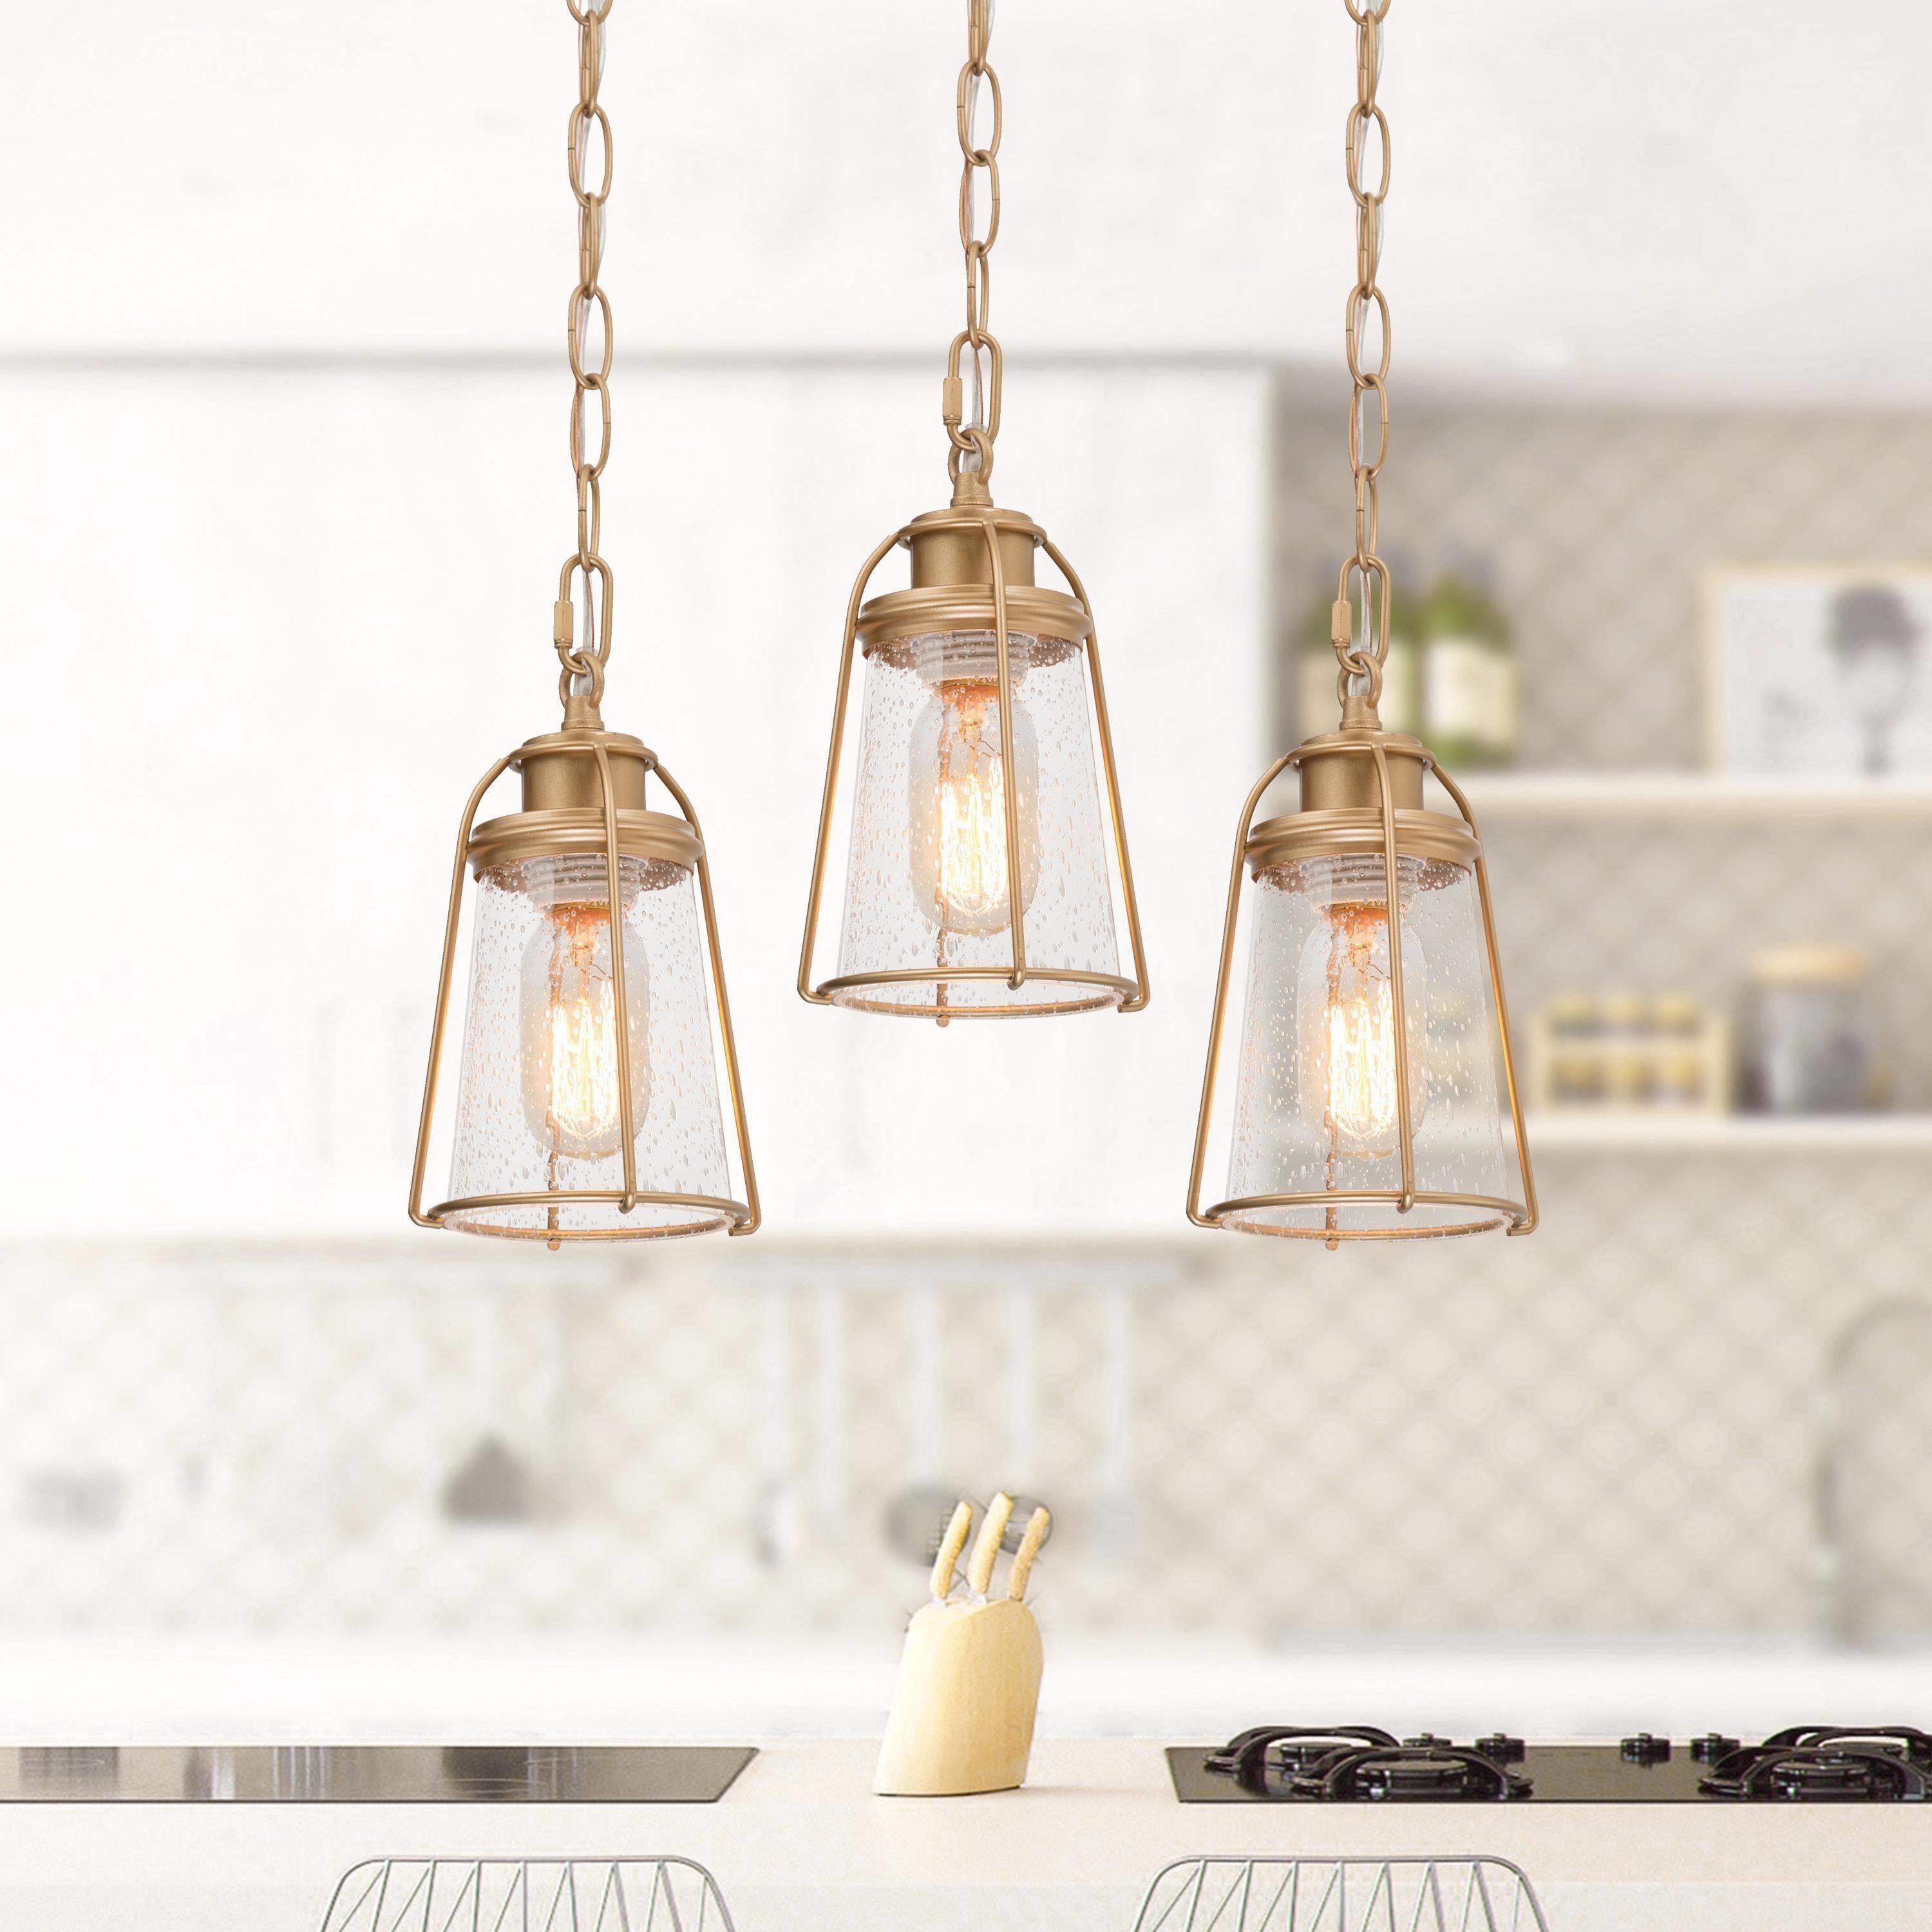 sind in voller Kraft Uolfin Matte Pendant at department Shade Island Mini Light and Lantern Seeded Seeded Kitchen in Glass the LED Gold Modern/Contemporary Lighting Glass Hanging